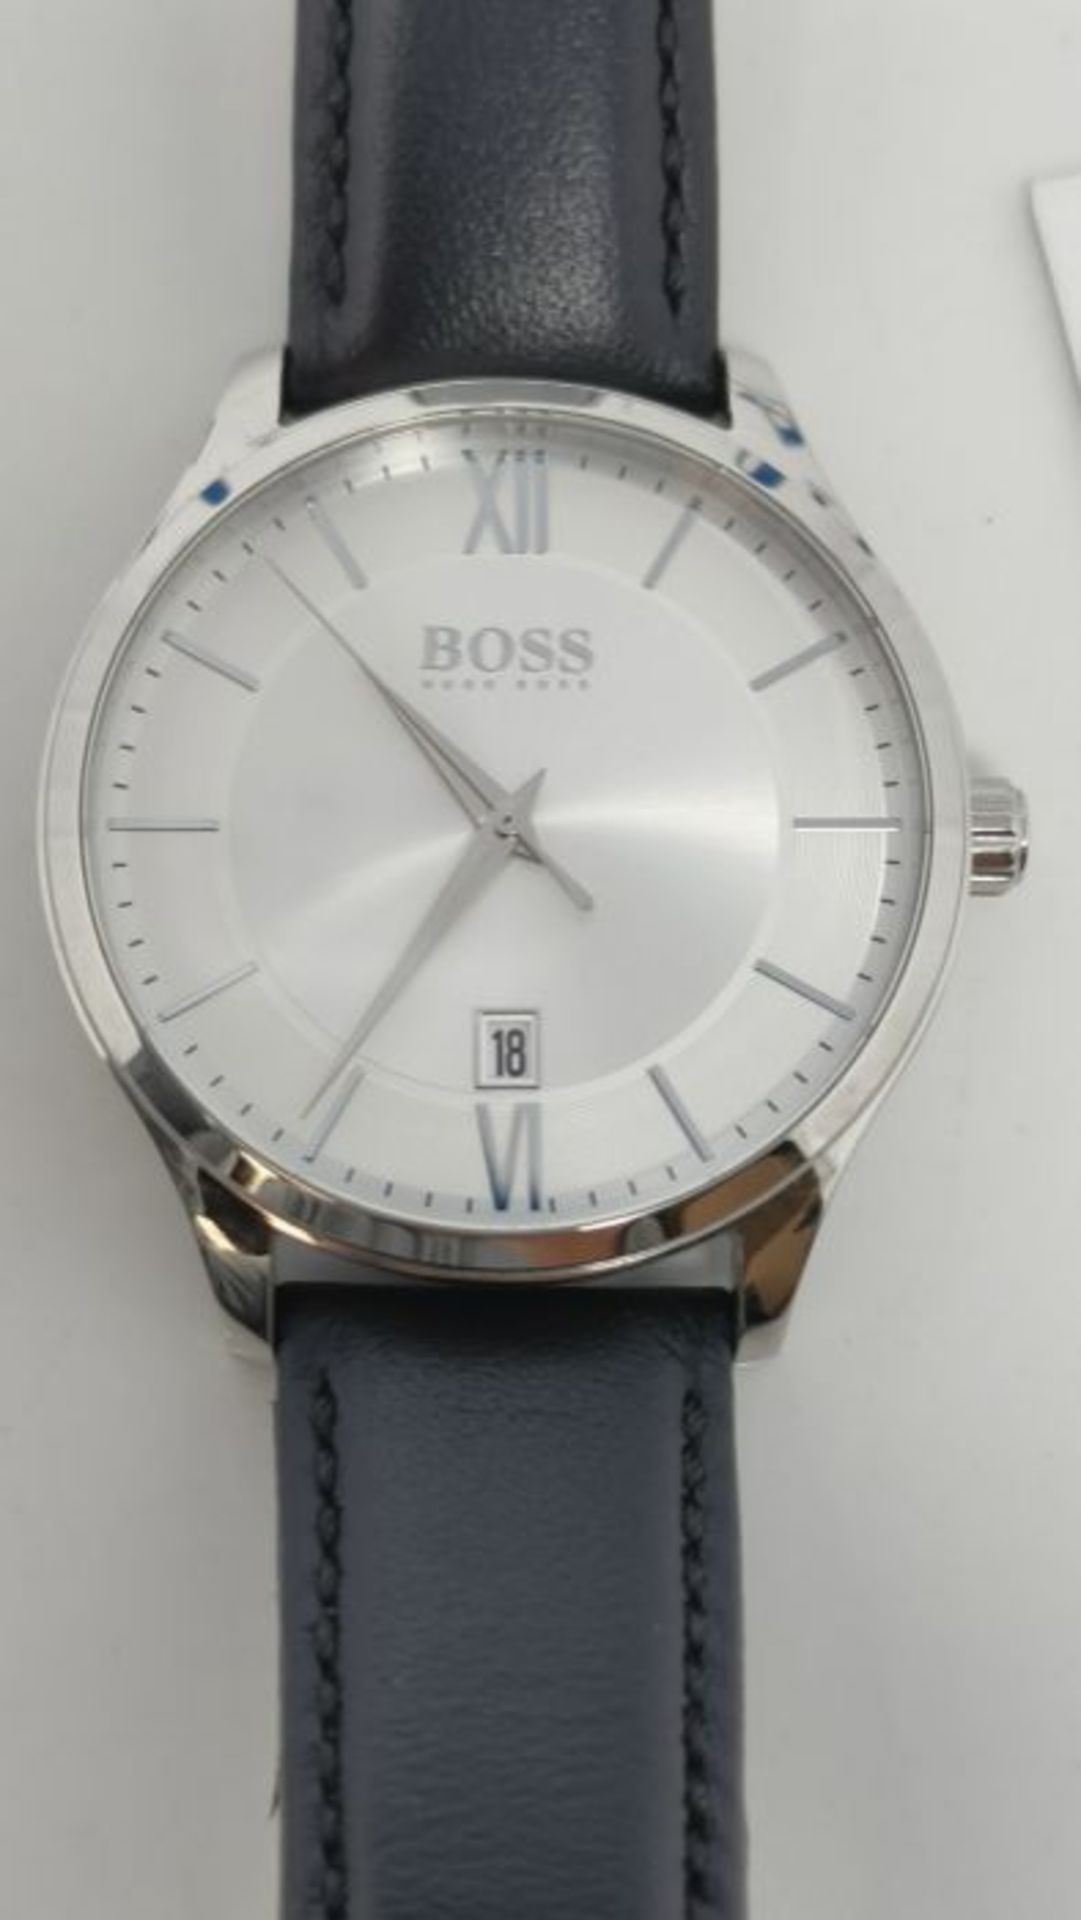 RRP £120.00 BOSS Men Analog Quartz Watch with Leather Strap 1513893 - Image 3 of 3